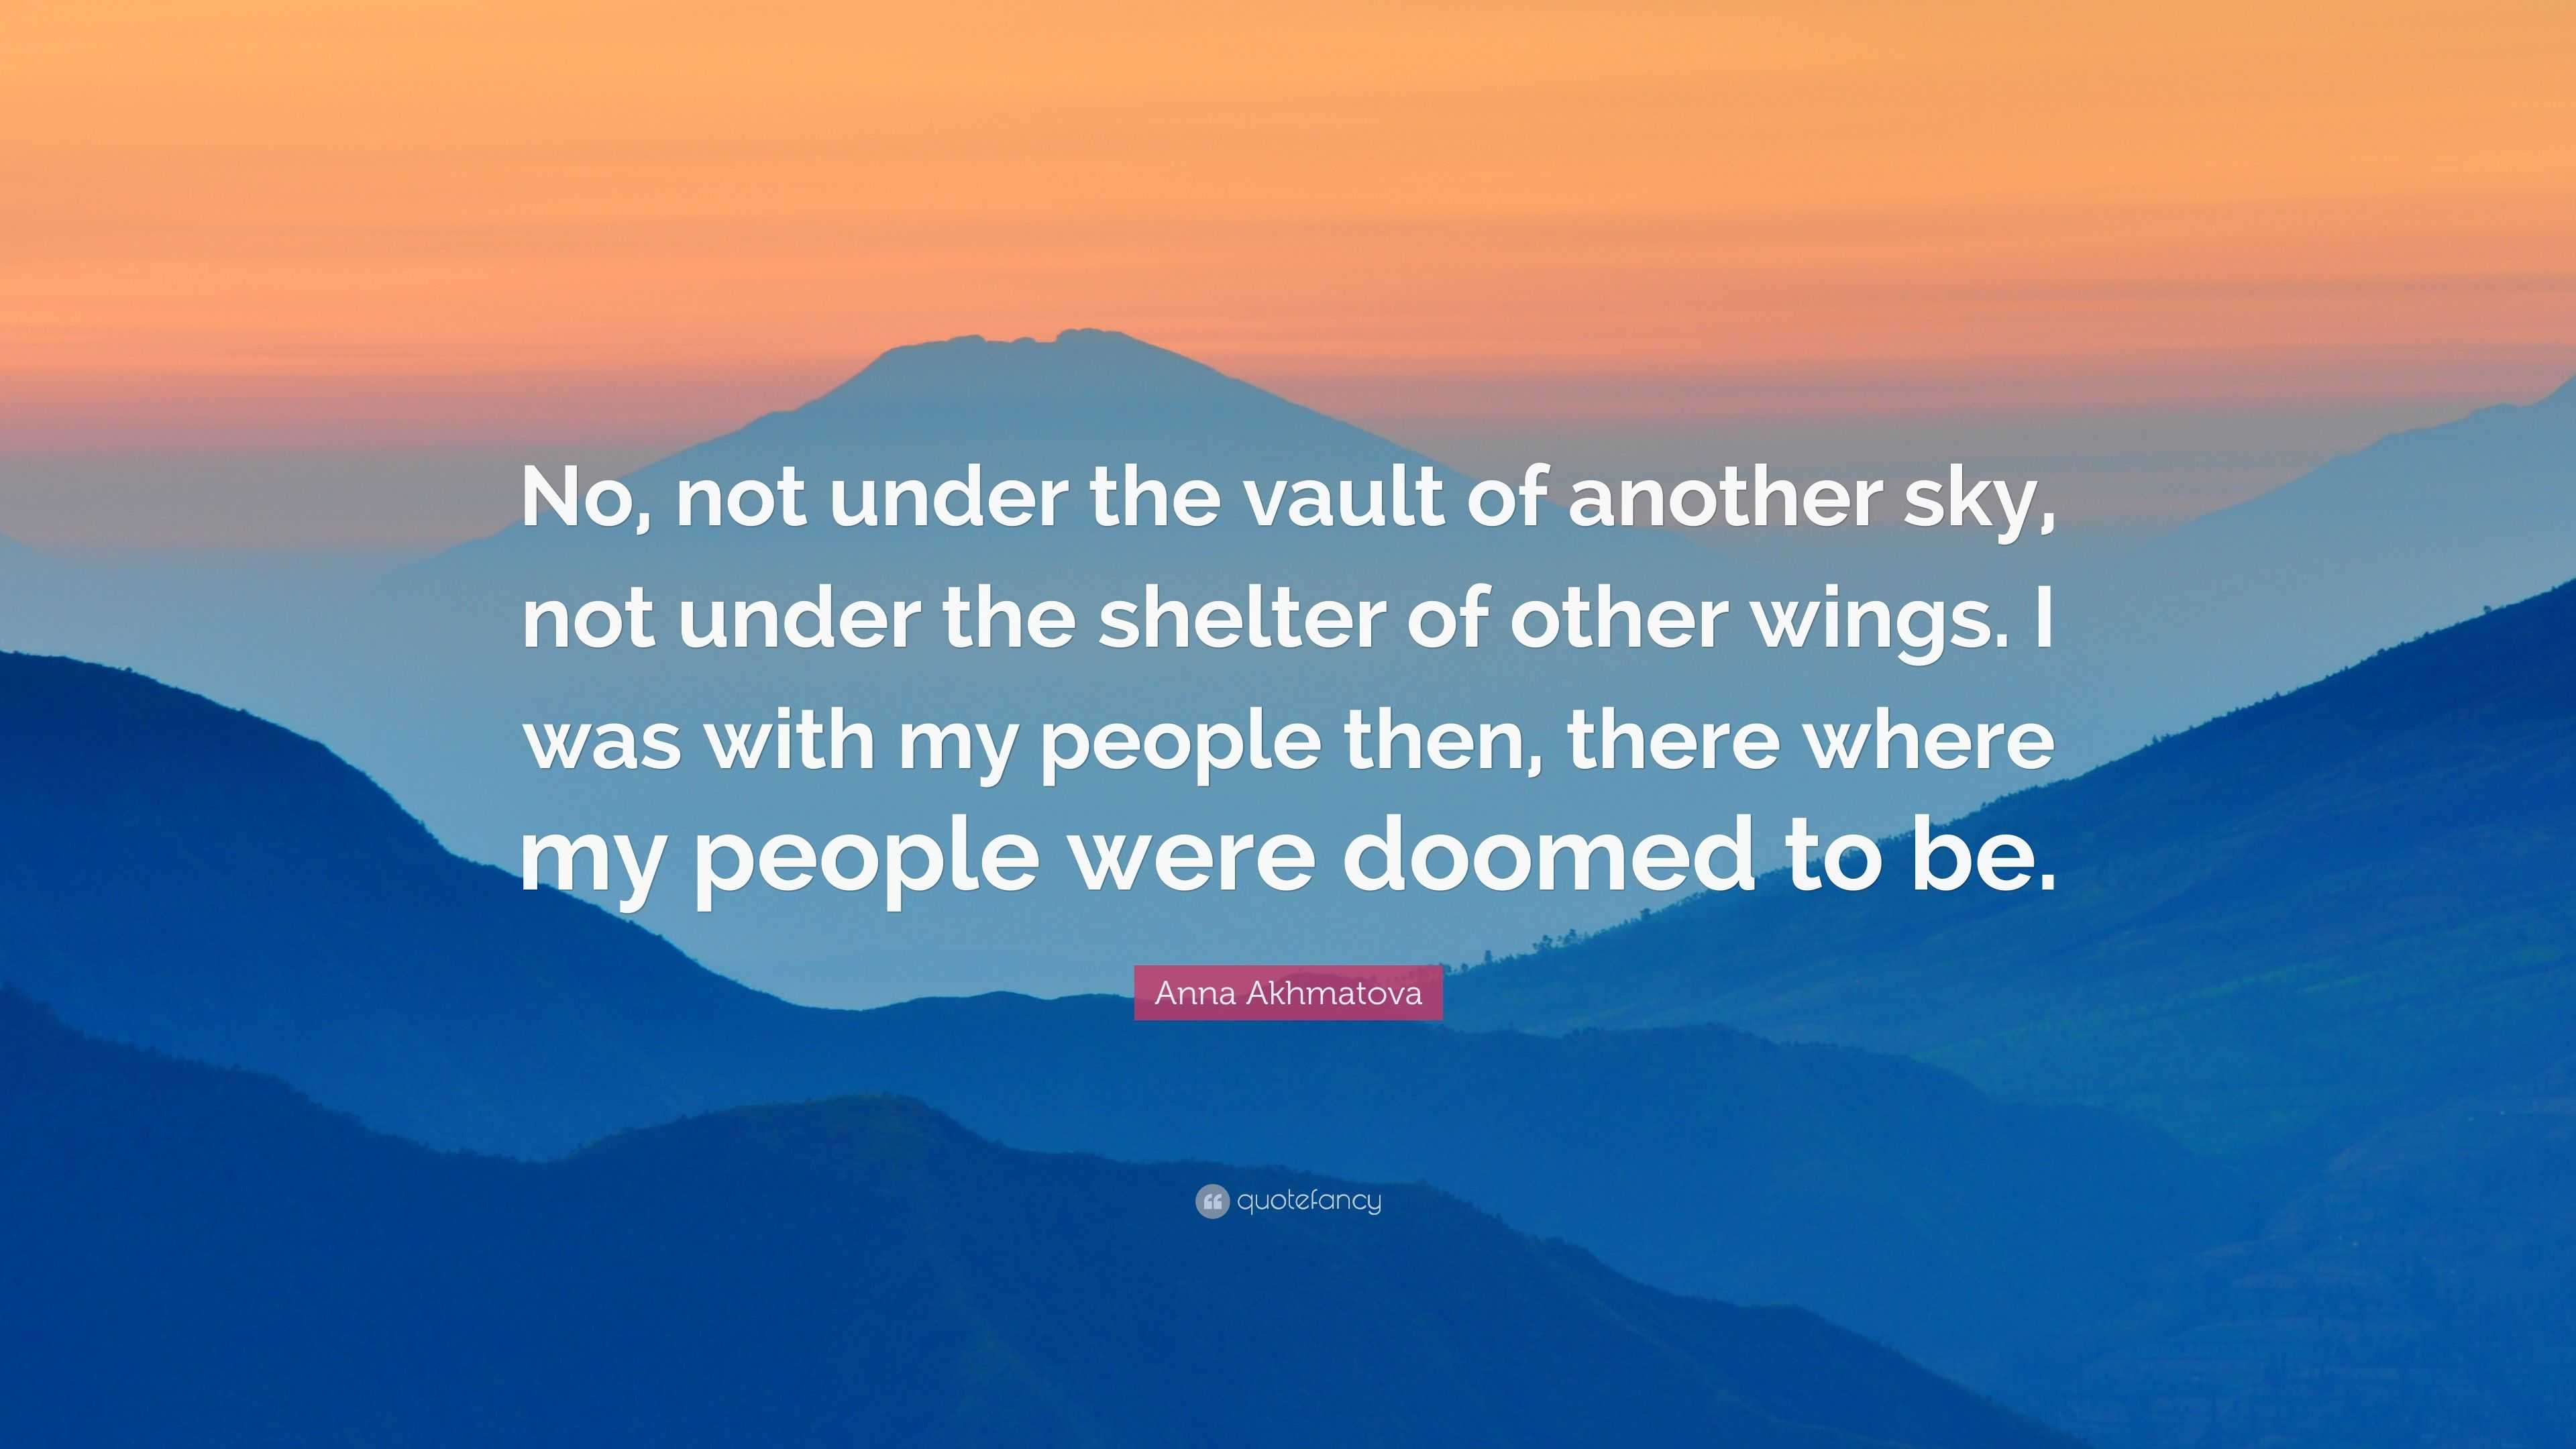 Anna Akhmatova Quote: “No, not under the vault of another sky, not ...